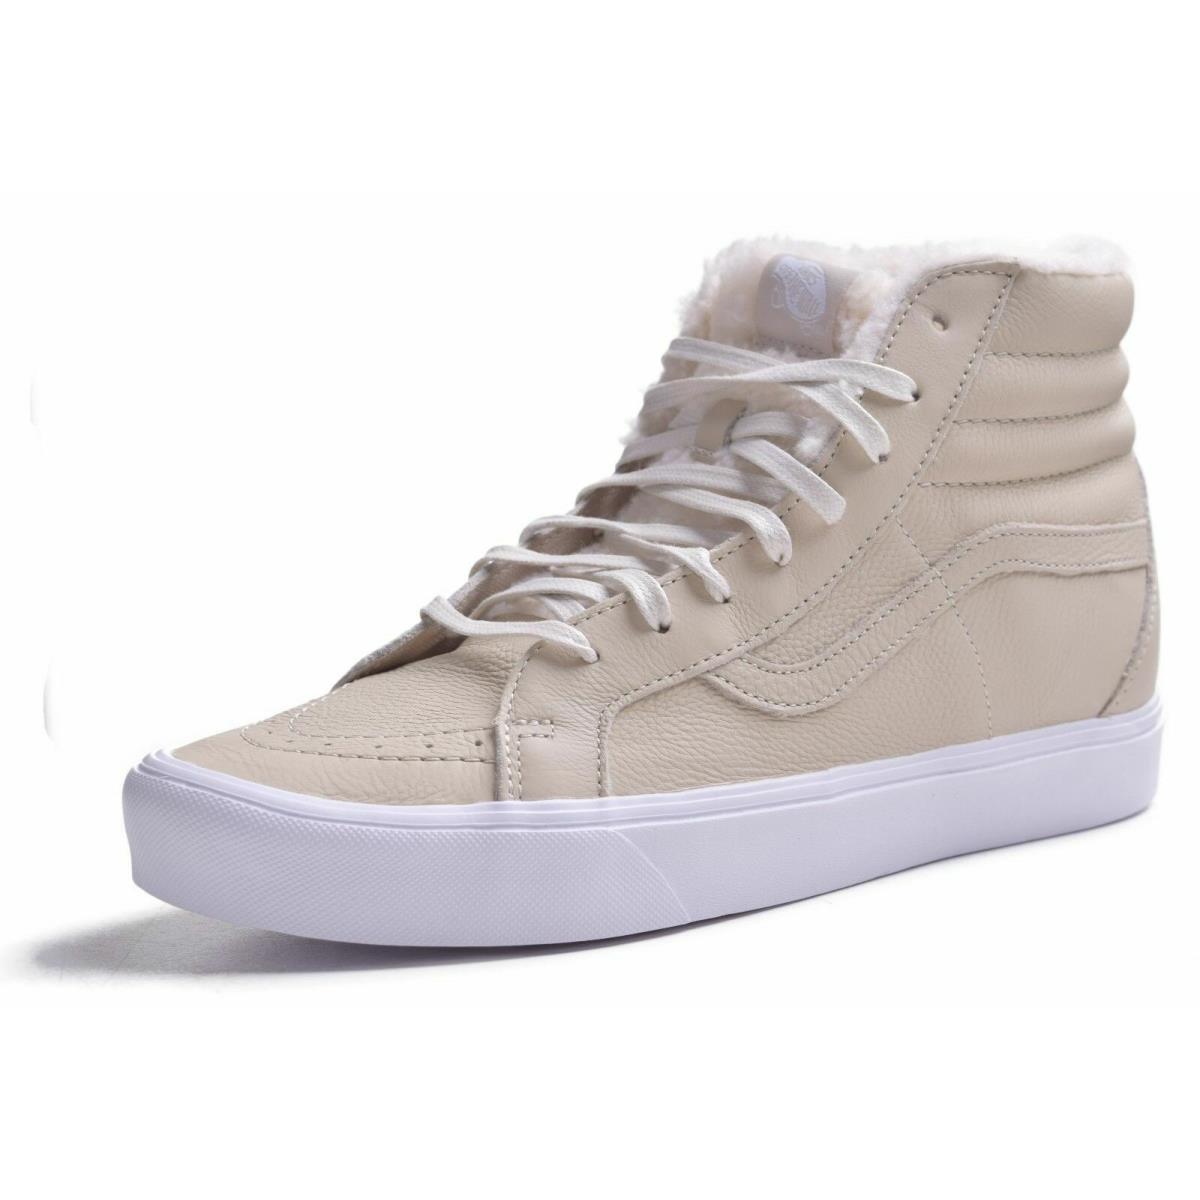 Vans Sk8 Hi Classic Sherpa Cement Taupe Leather Skateboard Shoes Mens Womens